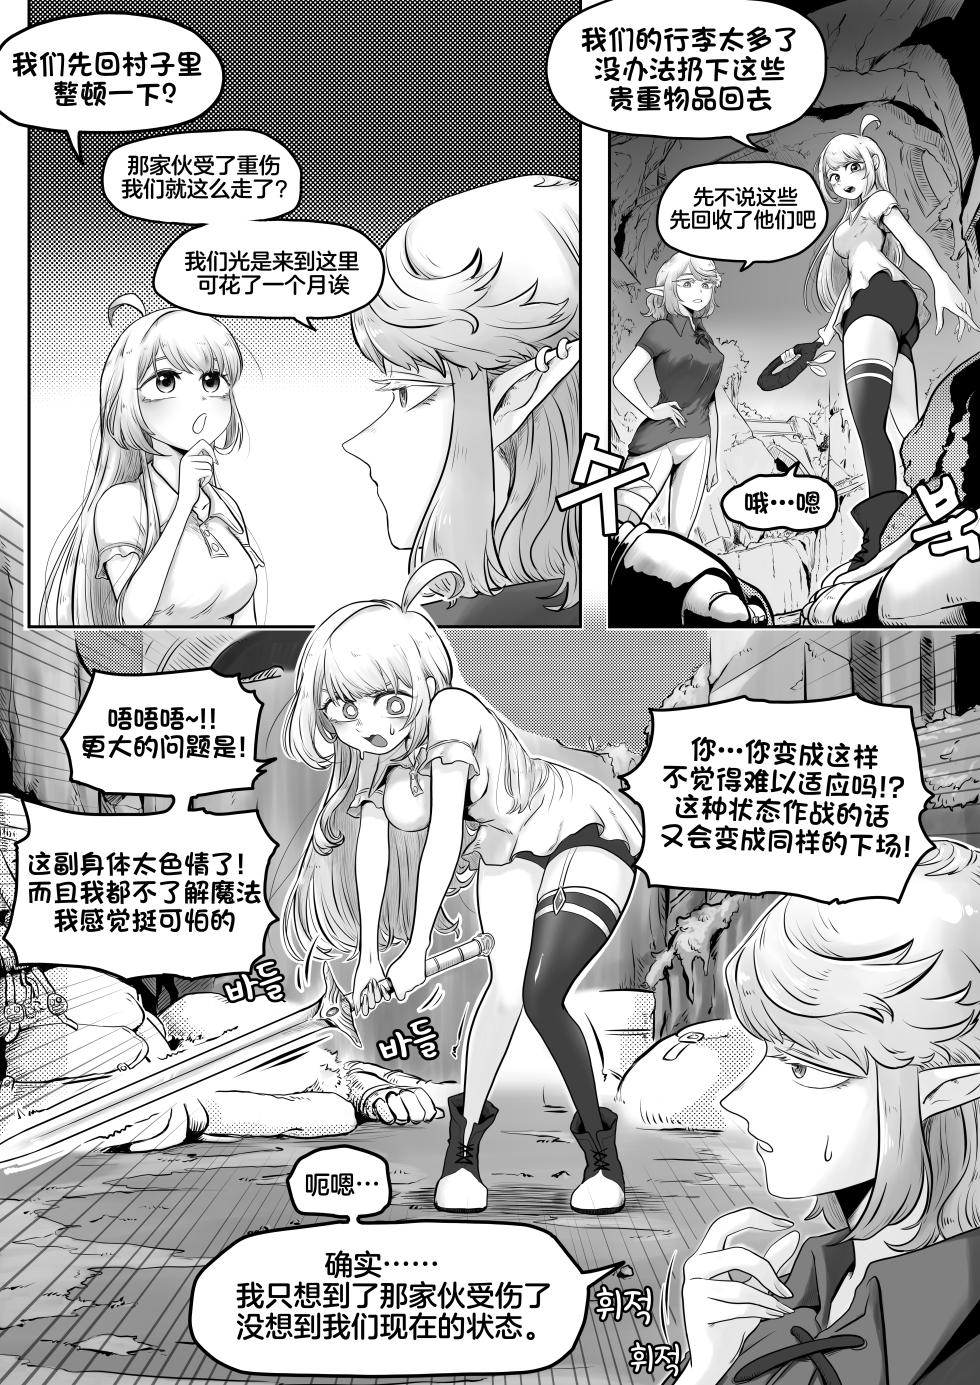 [Duckgu] Your Body Is Good [Chinese] [不咕鸟汉化组] - Page 15